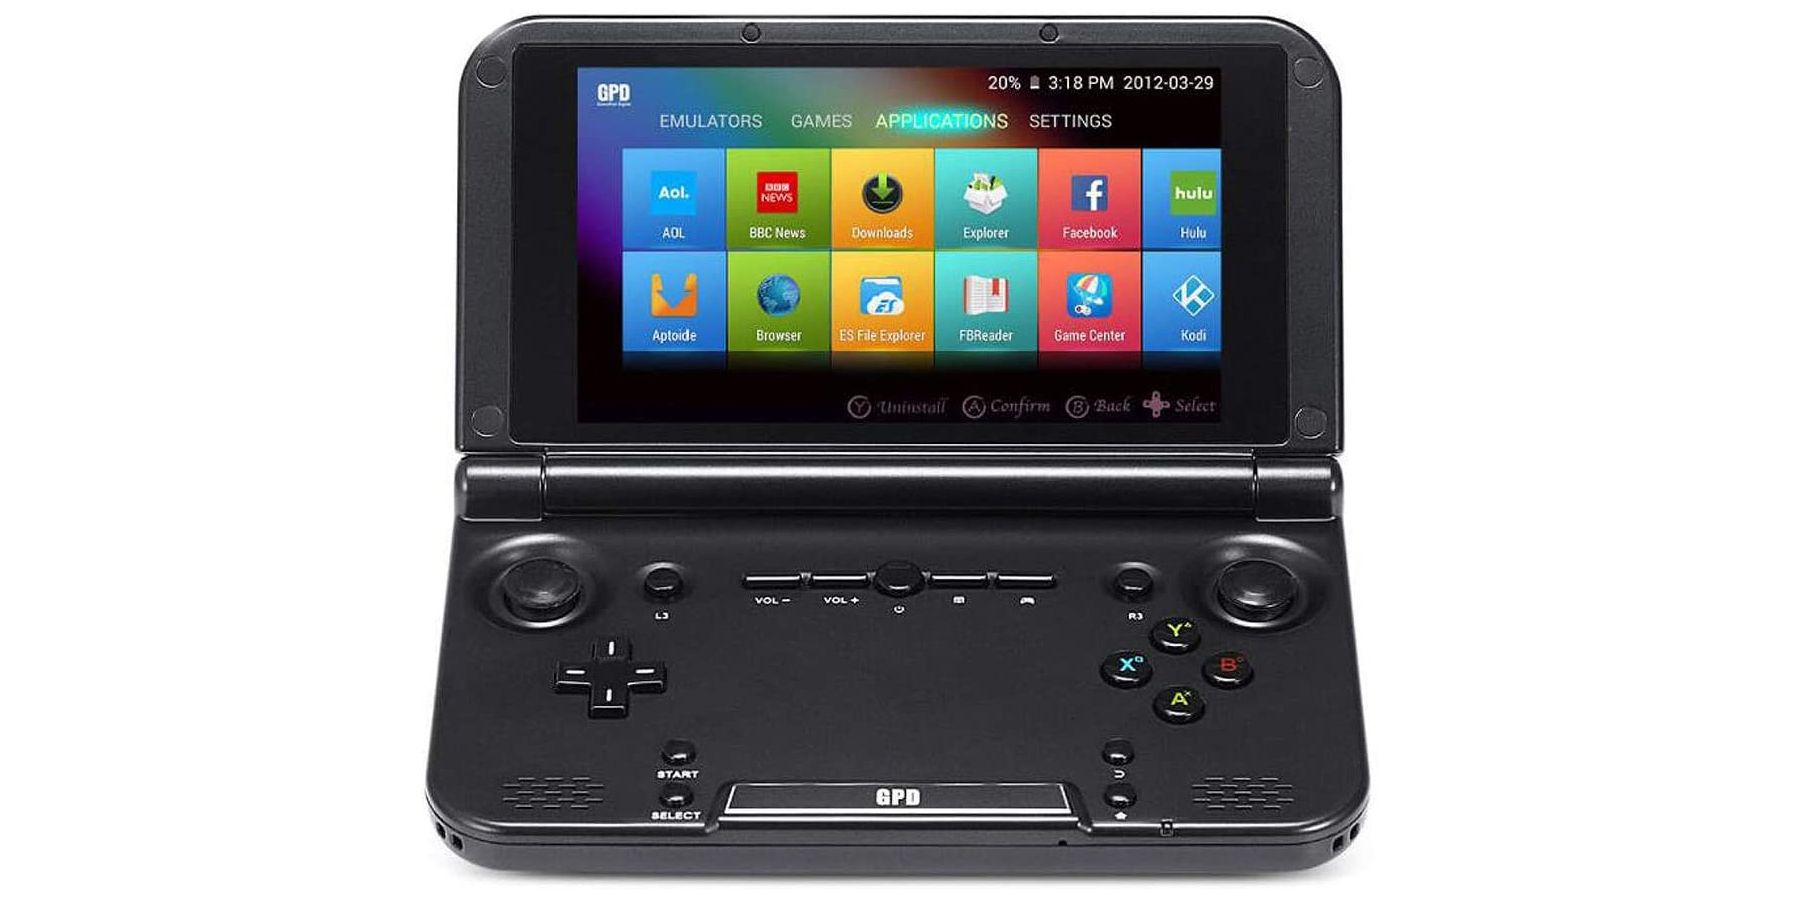 A screenshot showing the GPD XD handheld console